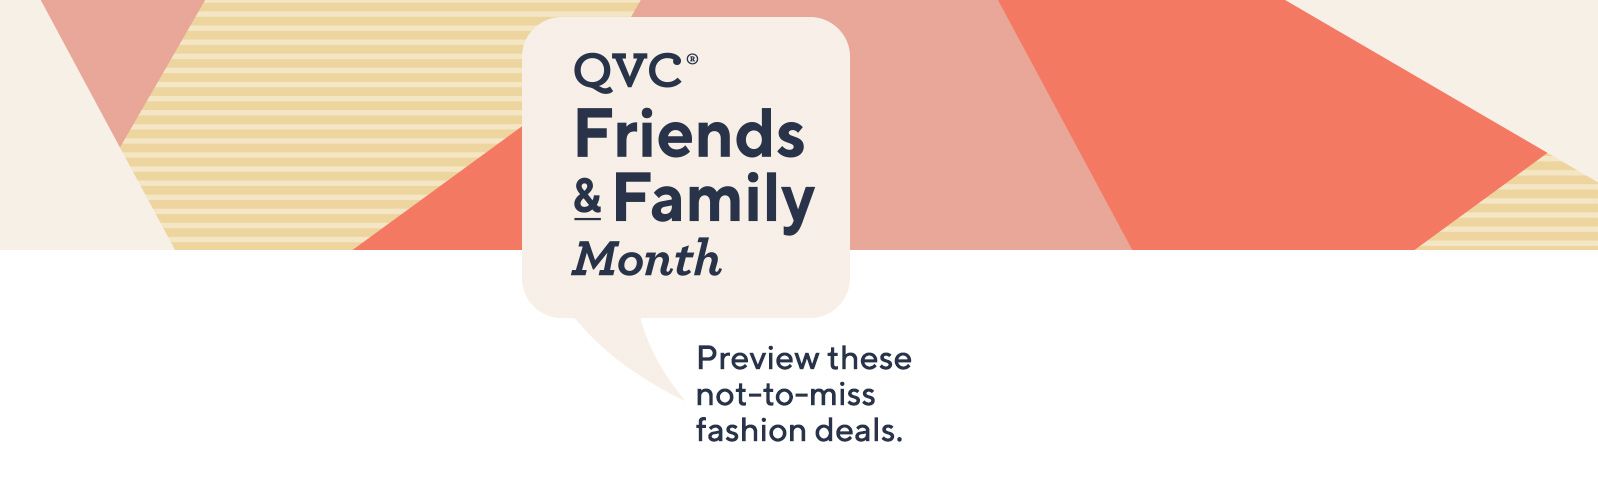 Friends & Family Month Preview these not-to-miss fashion deals.